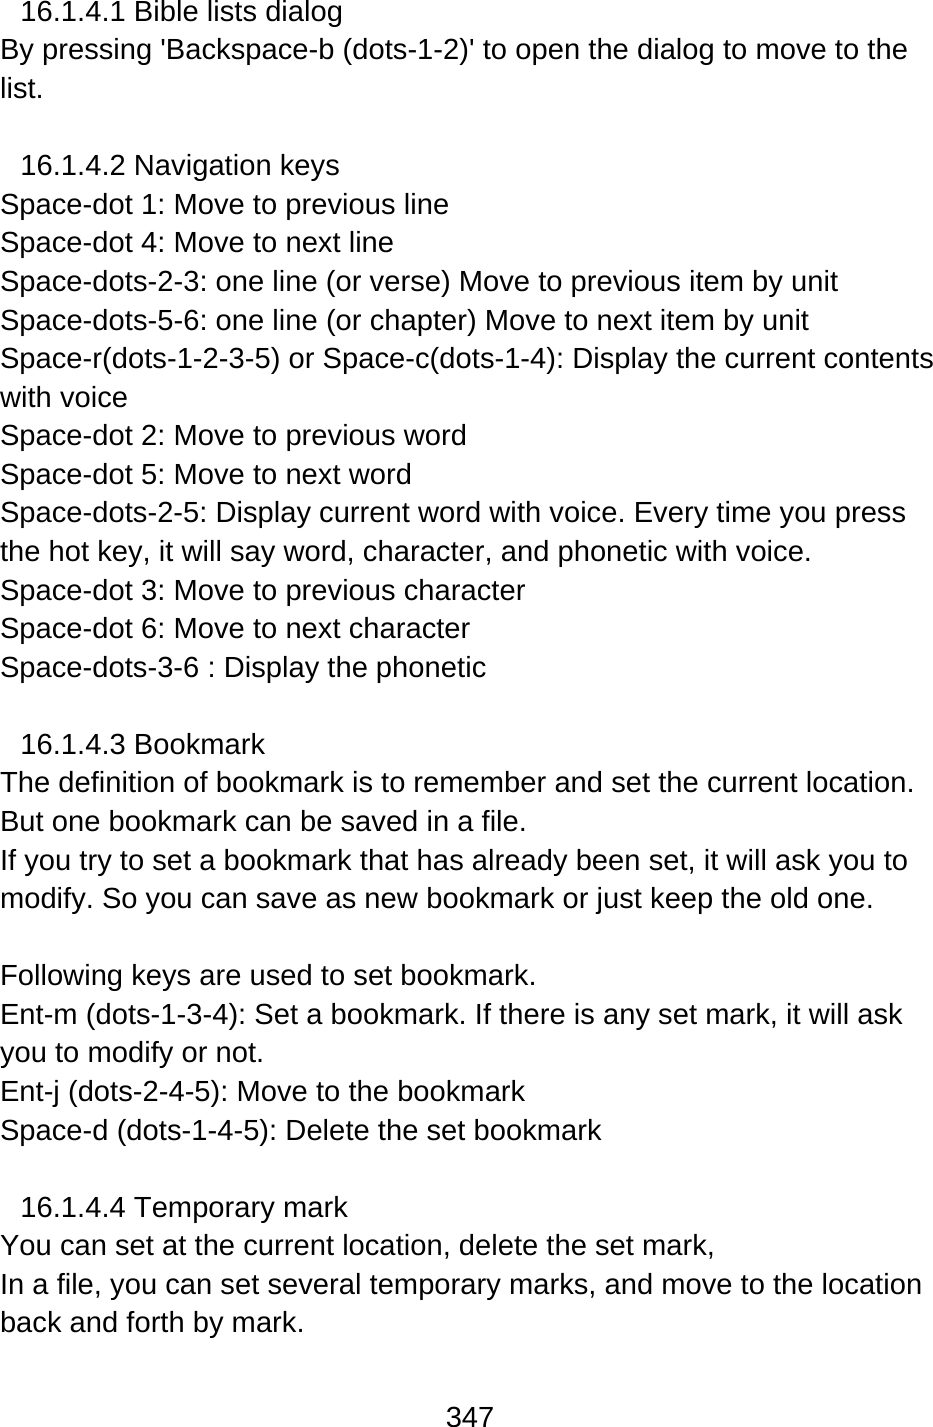 347  16.1.4.1 Bible lists dialog By pressing &apos;Backspace-b (dots-1-2)&apos; to open the dialog to move to the list.  16.1.4.2 Navigation keys Space-dot 1: Move to previous line   Space-dot 4: Move to next line Space-dots-2-3: one line (or verse) Move to previous item by unit Space-dots-5-6: one line (or chapter) Move to next item by unit Space-r(dots-1-2-3-5) or Space-c(dots-1-4): Display the current contents with voice Space-dot 2: Move to previous word Space-dot 5: Move to next word Space-dots-2-5: Display current word with voice. Every time you press the hot key, it will say word, character, and phonetic with voice. Space-dot 3: Move to previous character Space-dot 6: Move to next character Space-dots-3-6 : Display the phonetic  16.1.4.3 Bookmark The definition of bookmark is to remember and set the current location. But one bookmark can be saved in a file.   If you try to set a bookmark that has already been set, it will ask you to modify. So you can save as new bookmark or just keep the old one.  Following keys are used to set bookmark. Ent-m (dots-1-3-4): Set a bookmark. If there is any set mark, it will ask you to modify or not.   Ent-j (dots-2-4-5): Move to the bookmark Space-d (dots-1-4-5): Delete the set bookmark  16.1.4.4 Temporary mark You can set at the current location, delete the set mark,   In a file, you can set several temporary marks, and move to the location back and forth by mark.    